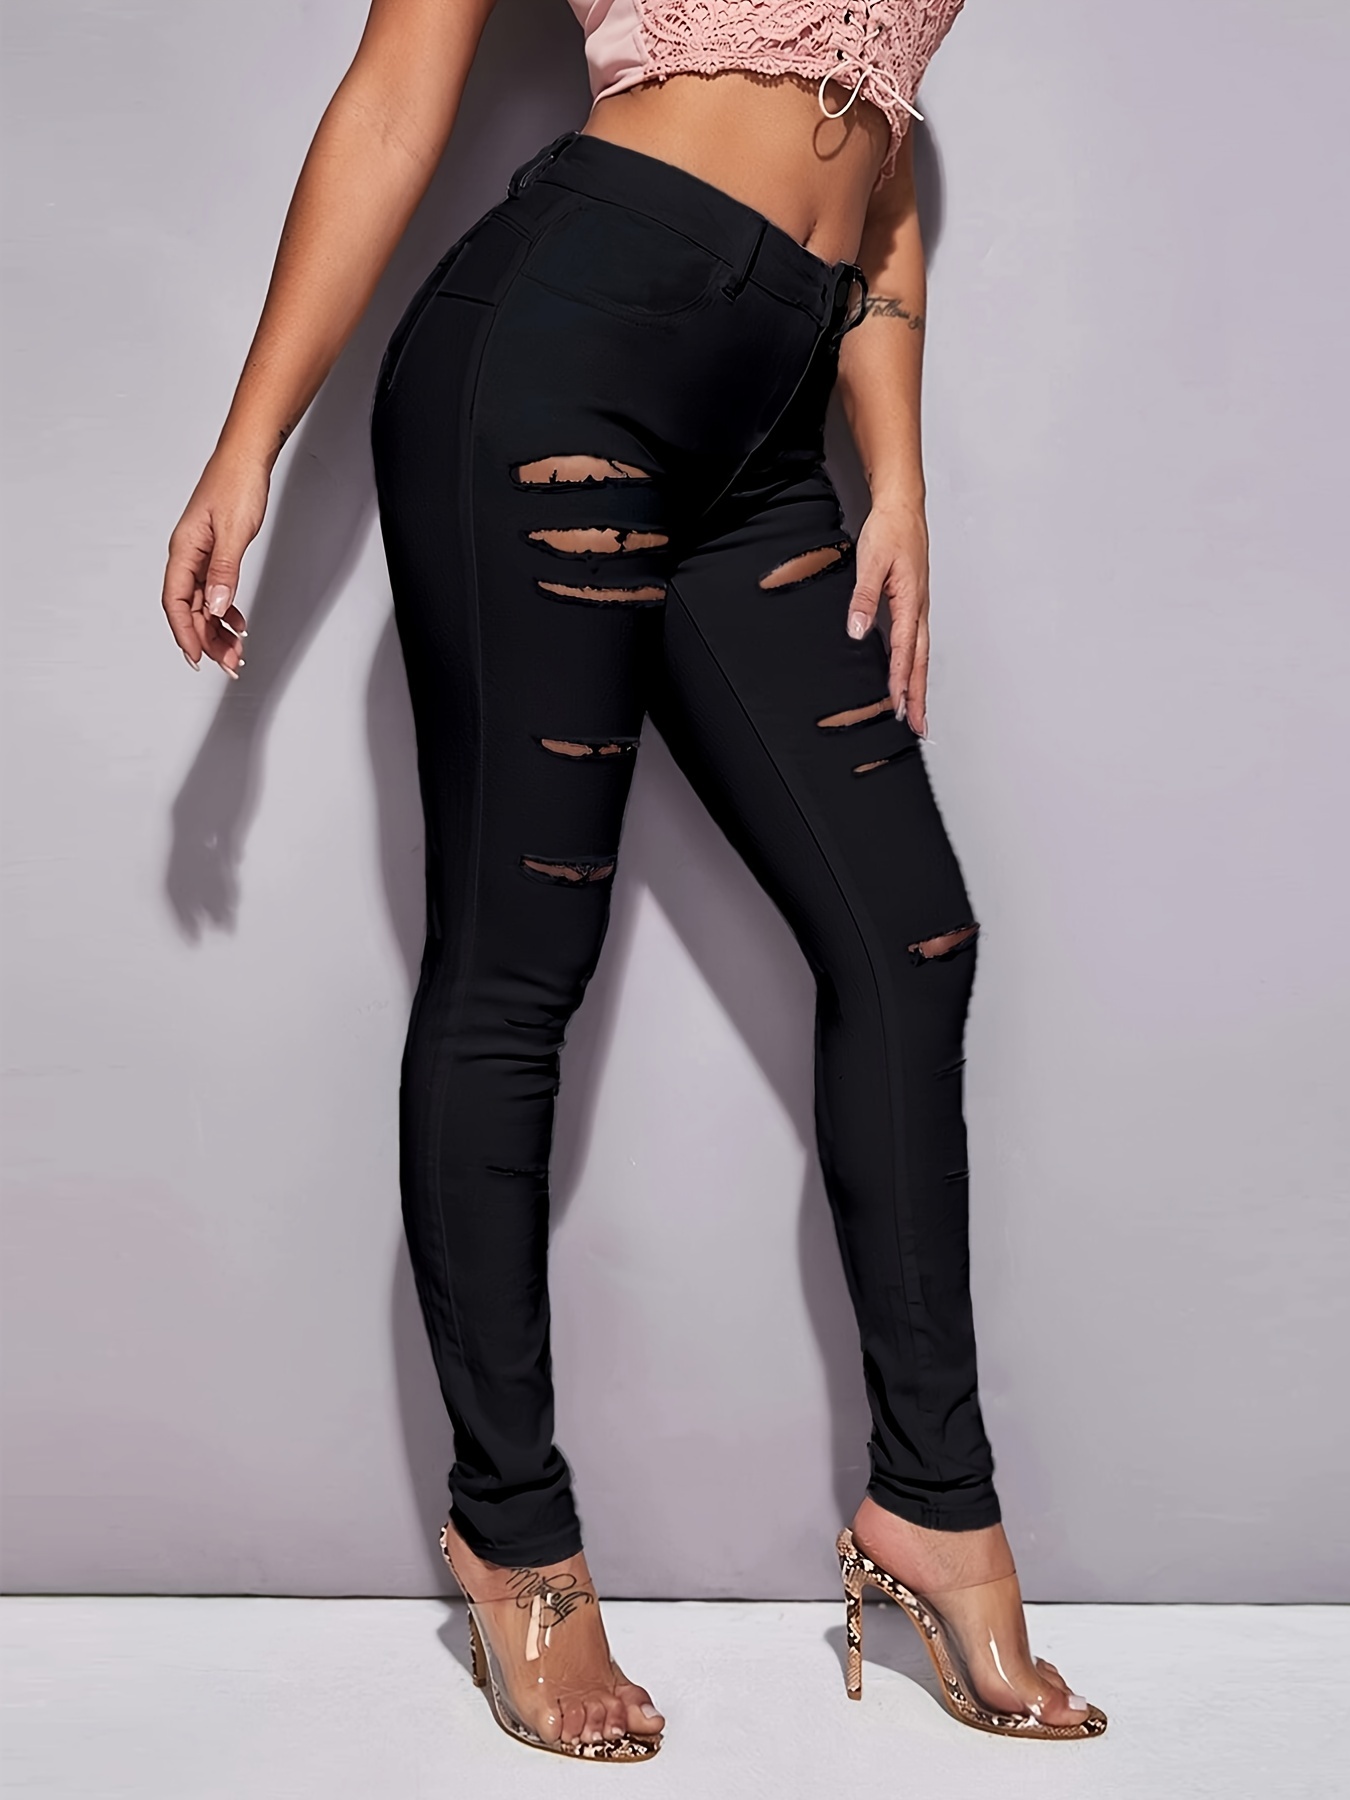 Women Destroyed Ripped Yoga Leggings Jeggings Pants Womens Distressed  Trousers